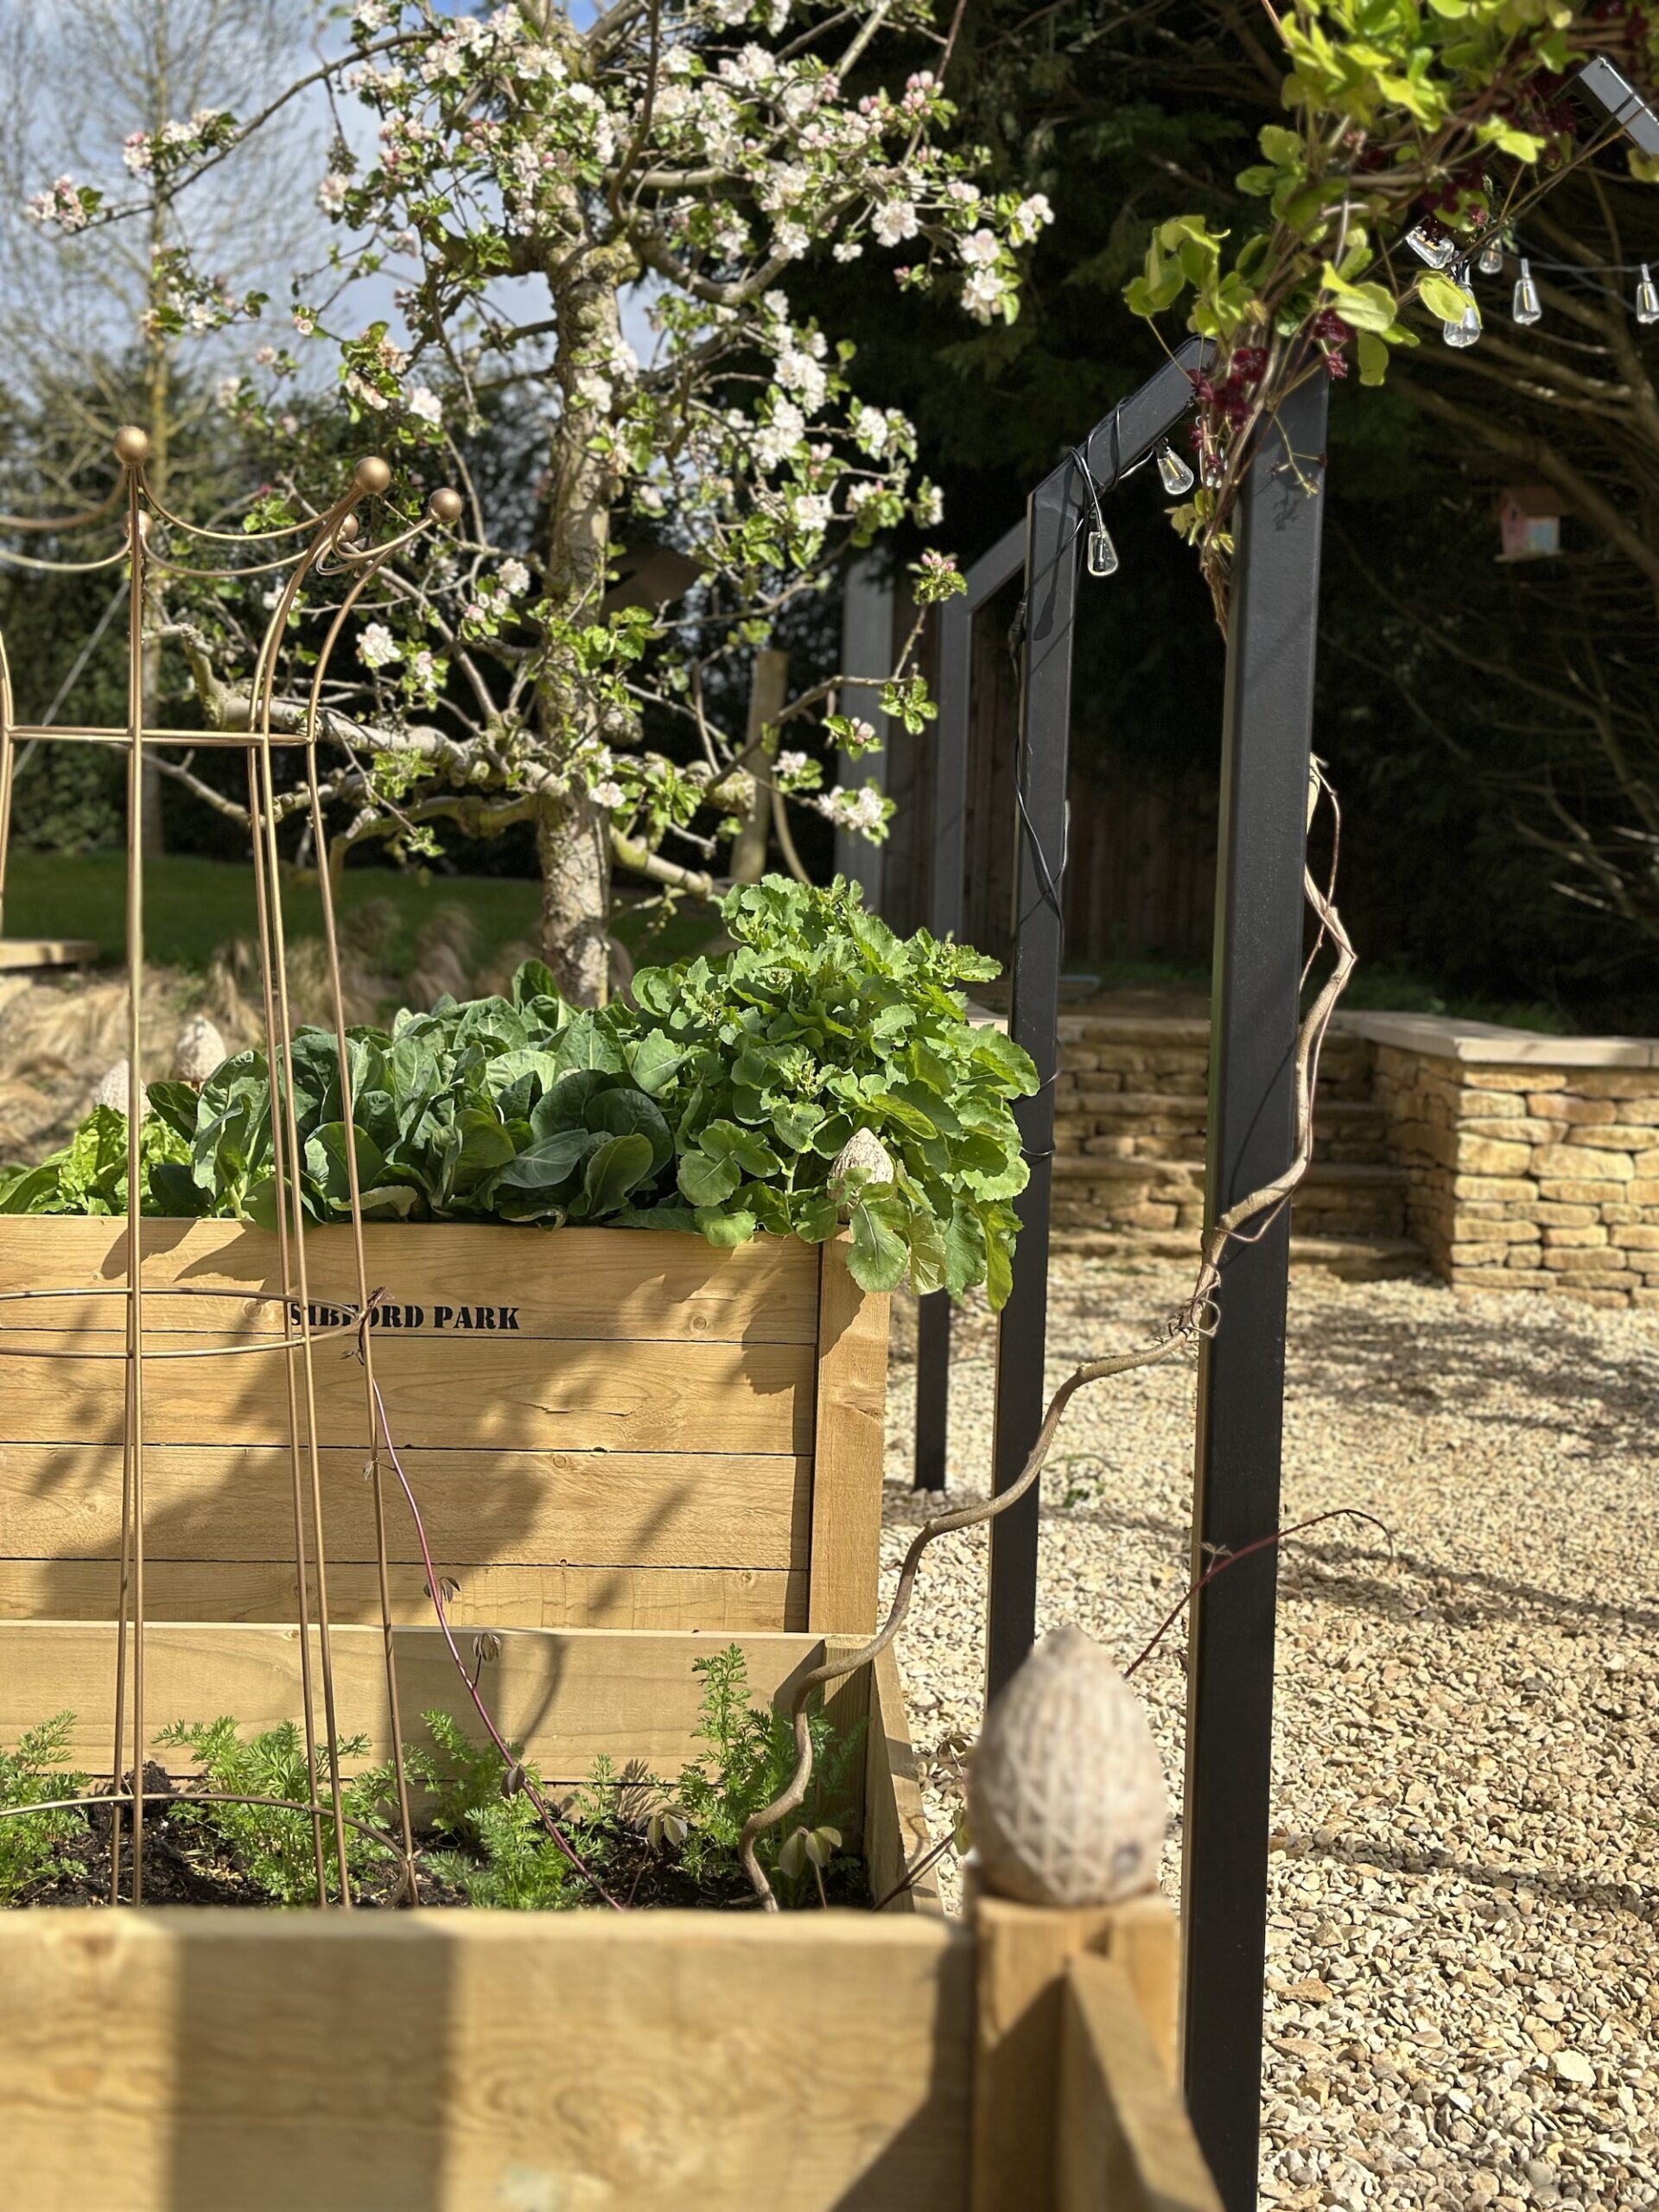 Wooden trough planters filled with hardy vegetable crops and blossoming fruit